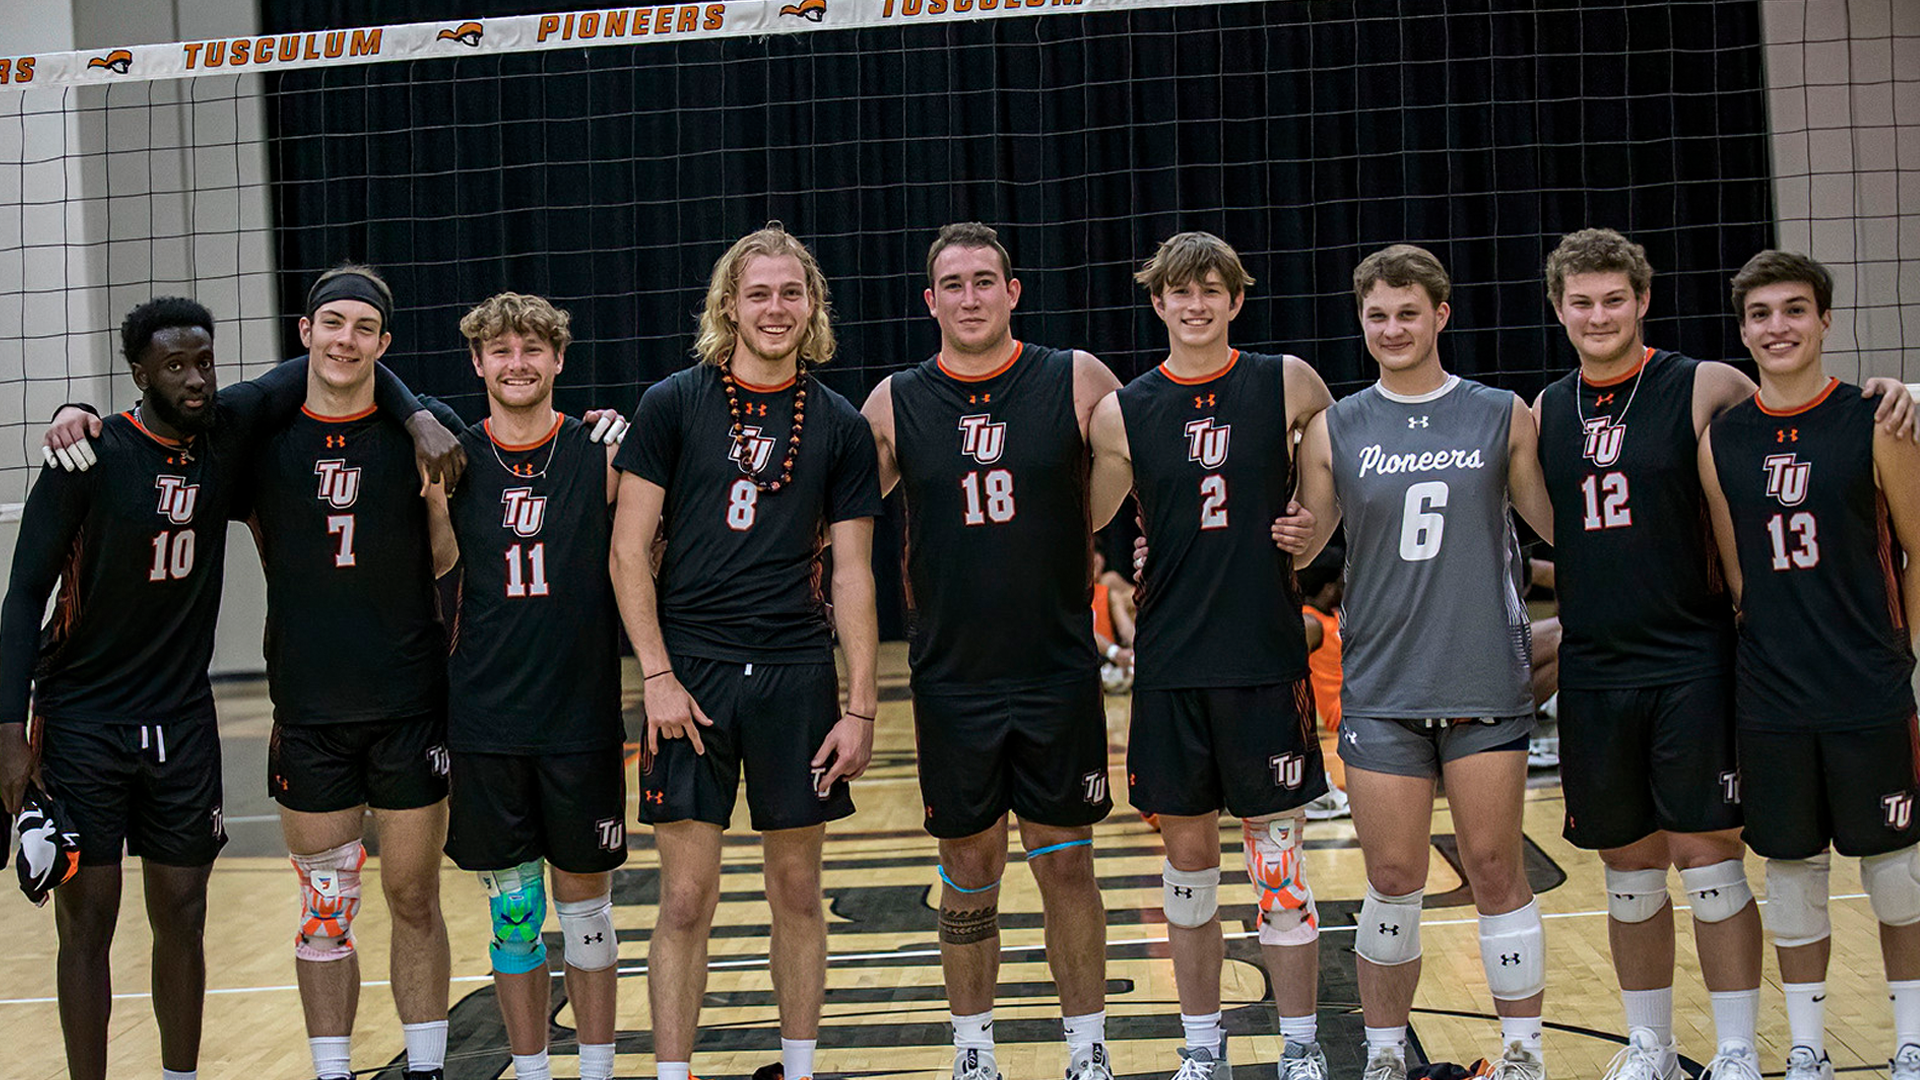 Tusculum finishes fifth at IVA Championship, Whyte named All-Tournament